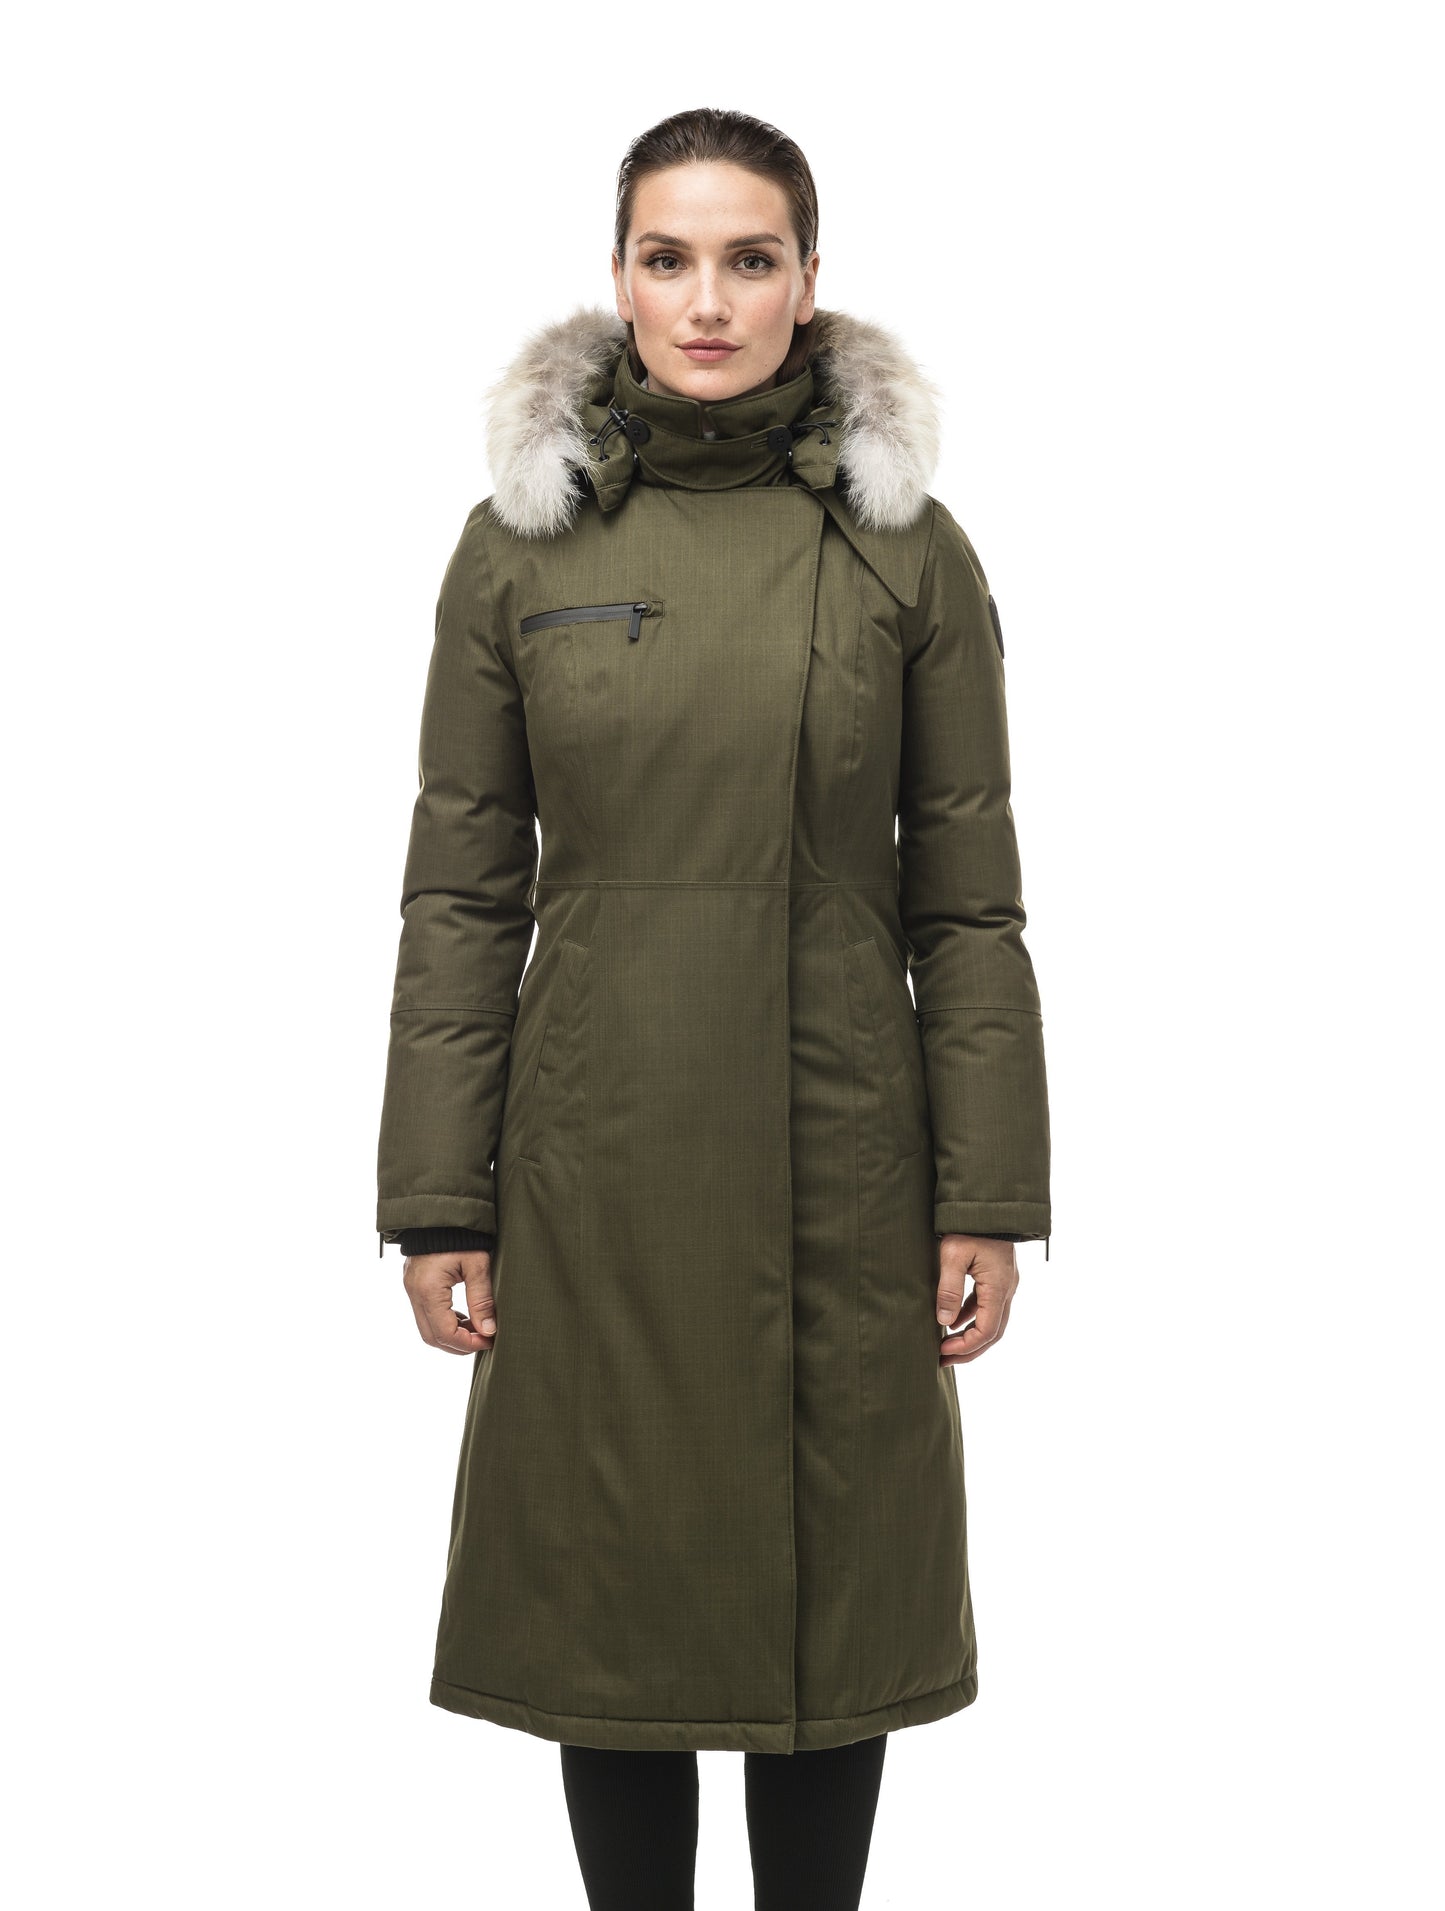 Long calf length women's trench inspired parka with removable fur trim around the hood and an asymetric closure in Fatigue